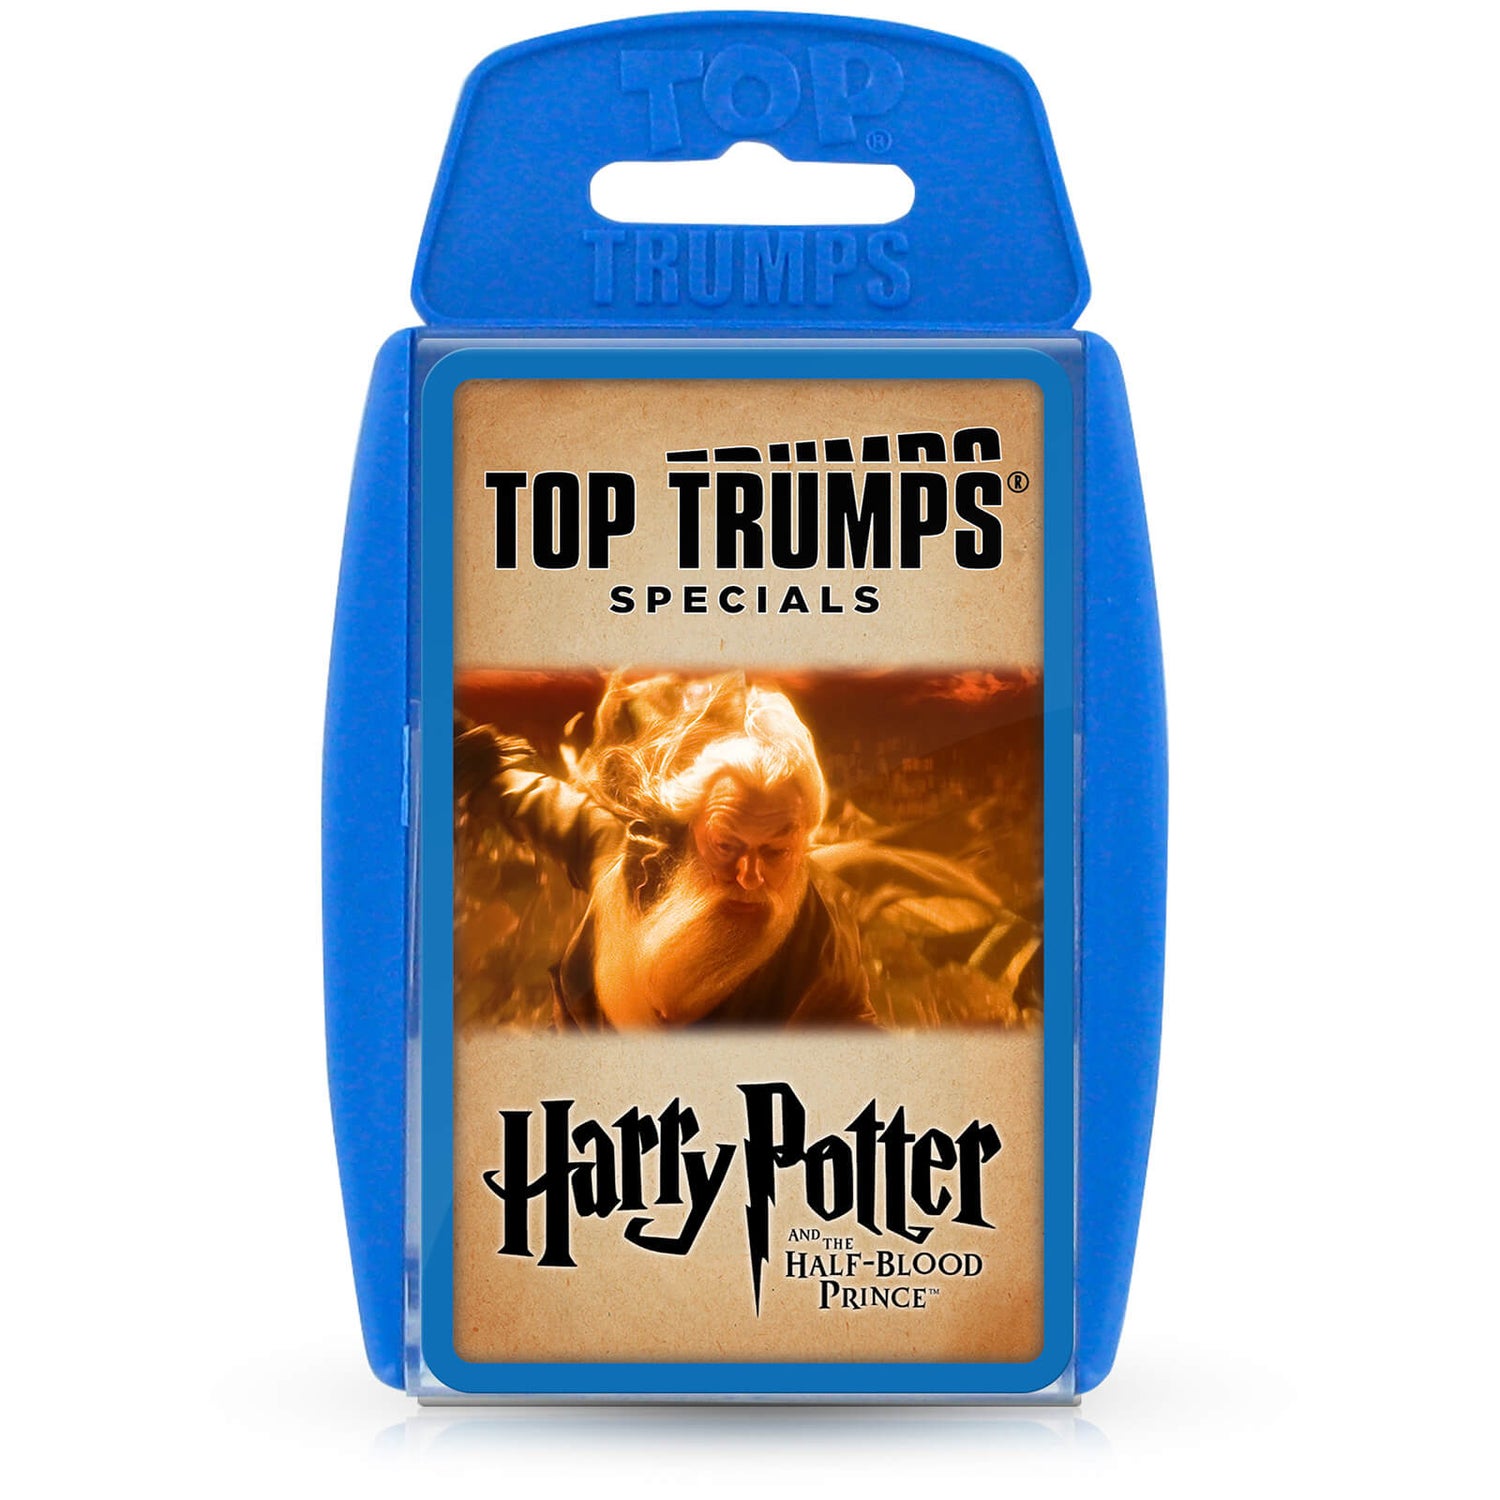 Top Trumps Specials - Harry Potter and The Half-Blood Prince Edition